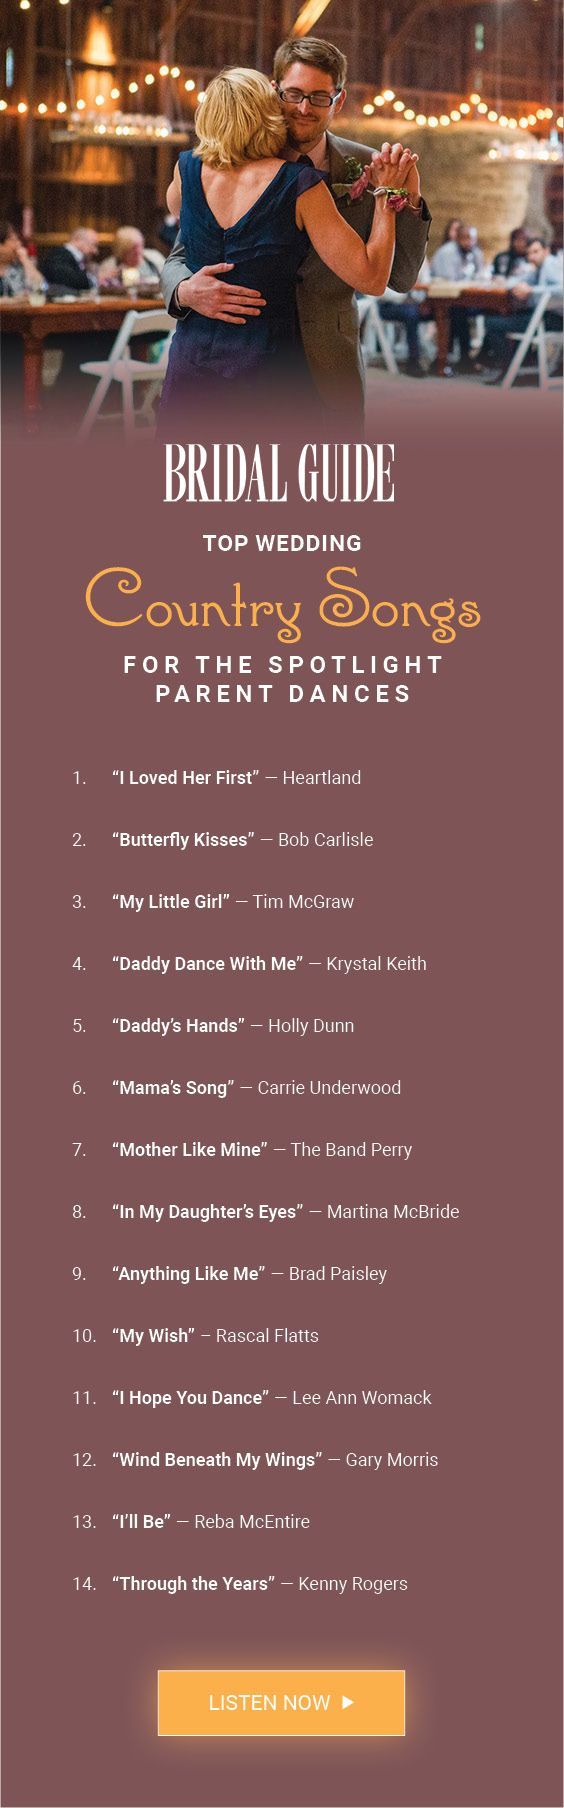 Get top song recommendations for the father-daughter dance and mother-son dance!